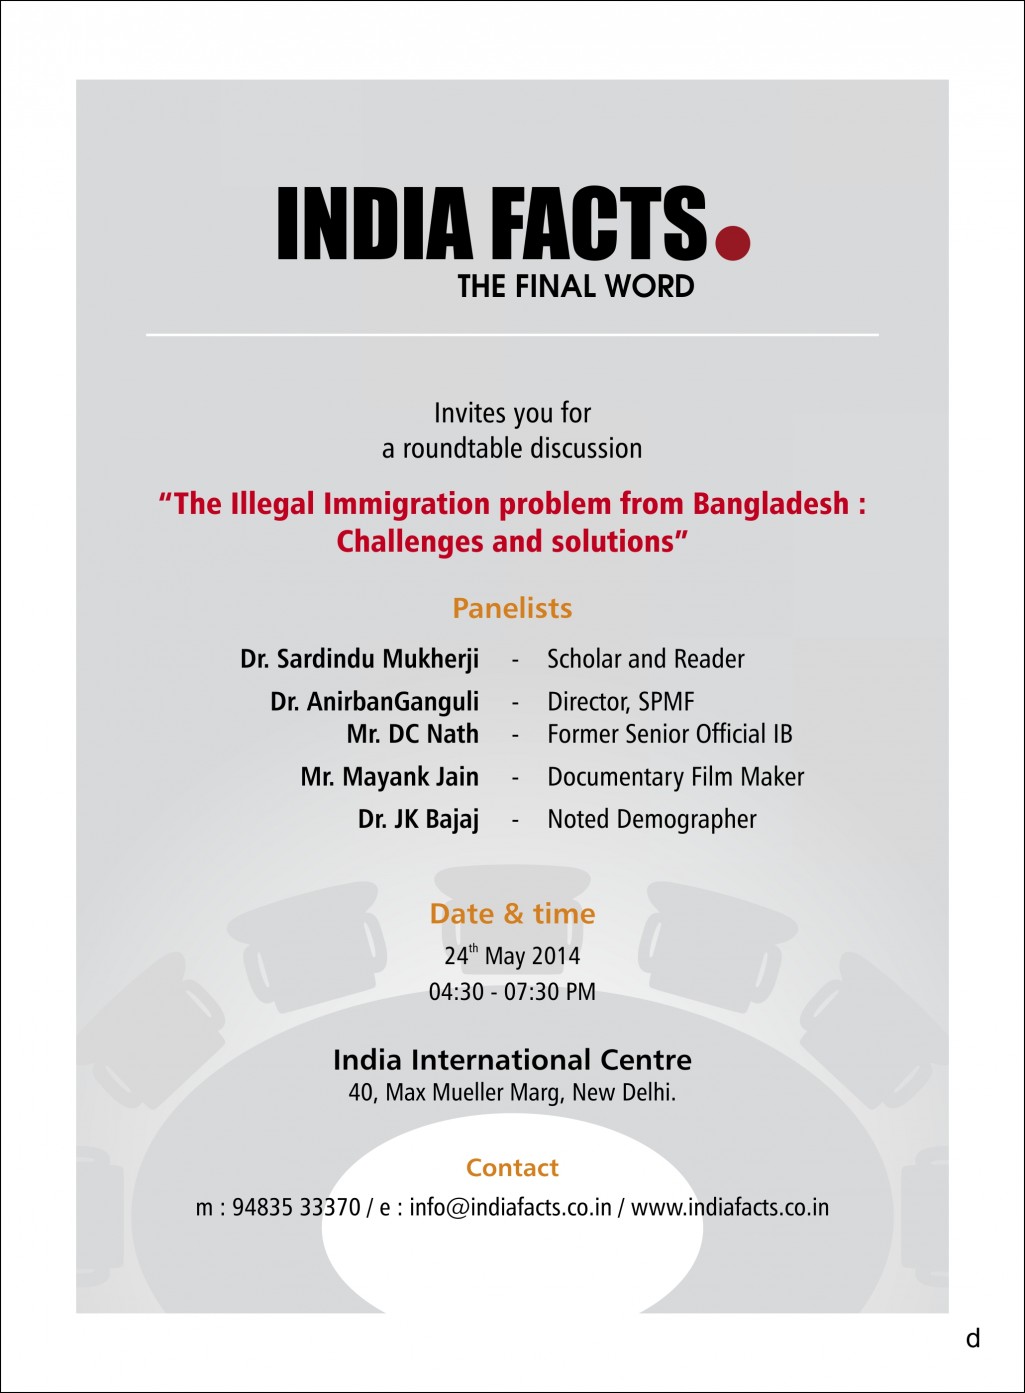 IndiaFacts Roundtable Invite